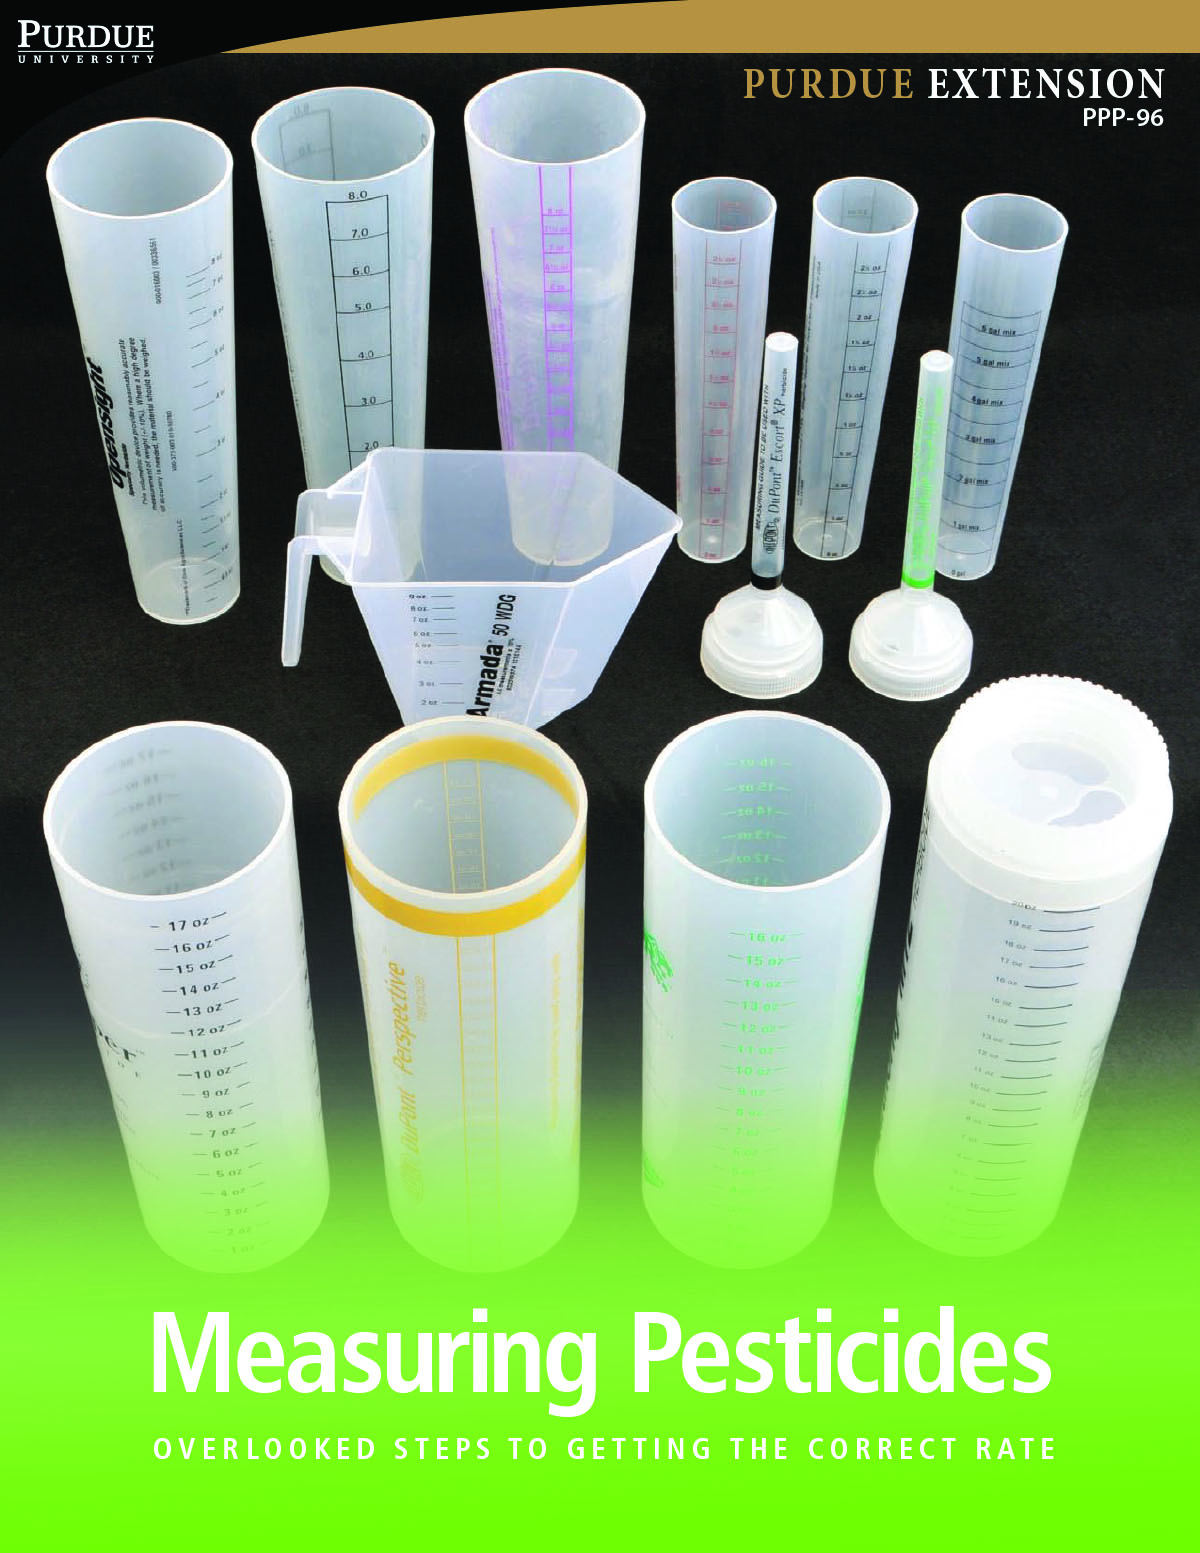 Measuring Pesticides: Overlooked Steps to Getting the Correct Rate (PPP-96). Understand effective measuring techniques that ensure success.